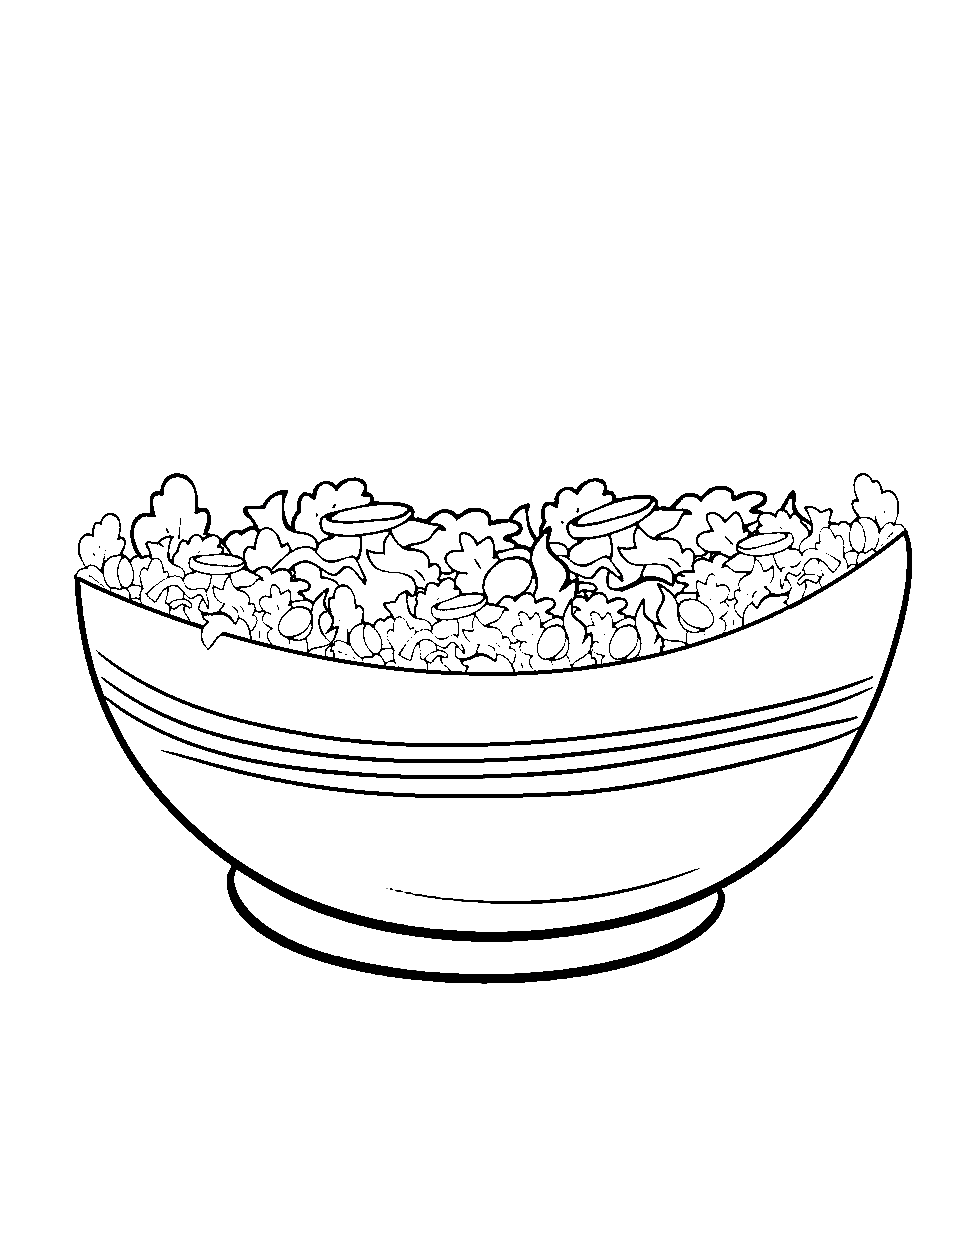 Lunch Salad Bowl Food Coloring Page - A bowl filled with fresh salad greens, veggies, and dressing.